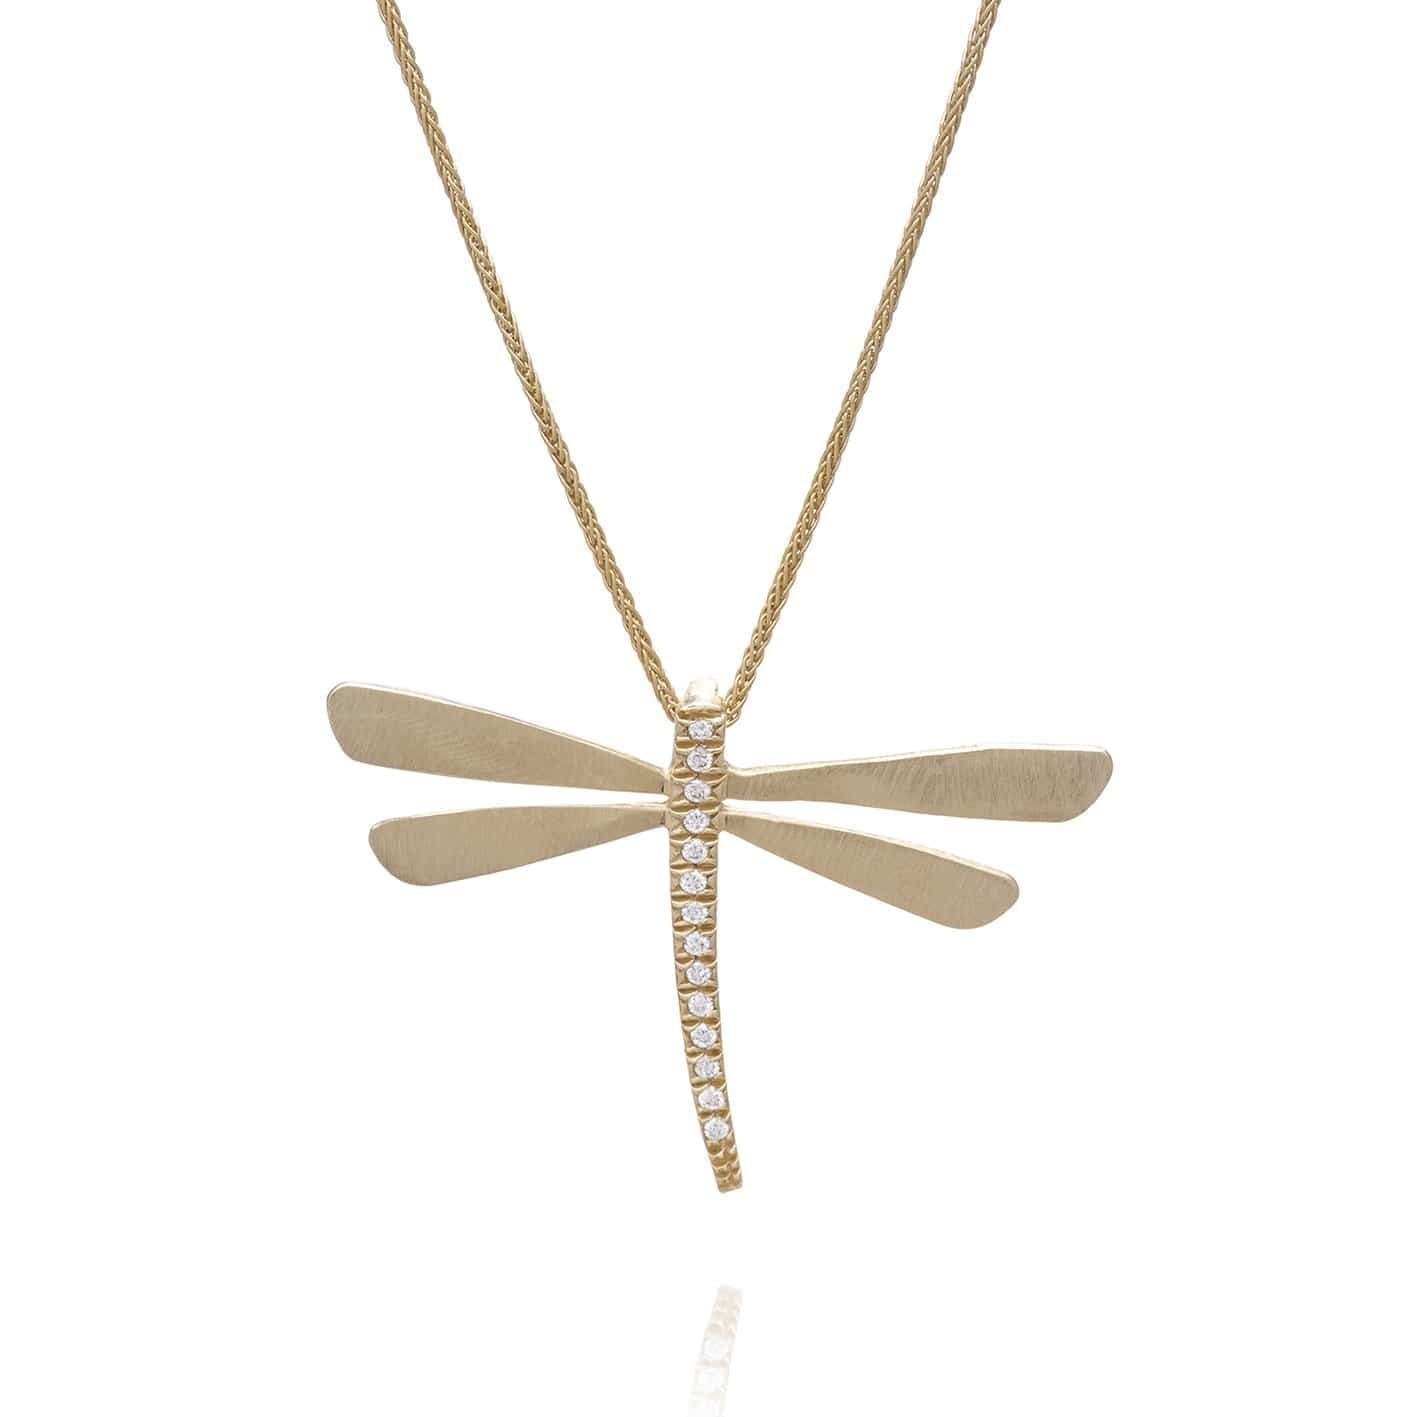 Dalia T Necklace Signature Collection 14KT YG Small Dragonfly Pendant Nacklace with Diamonds